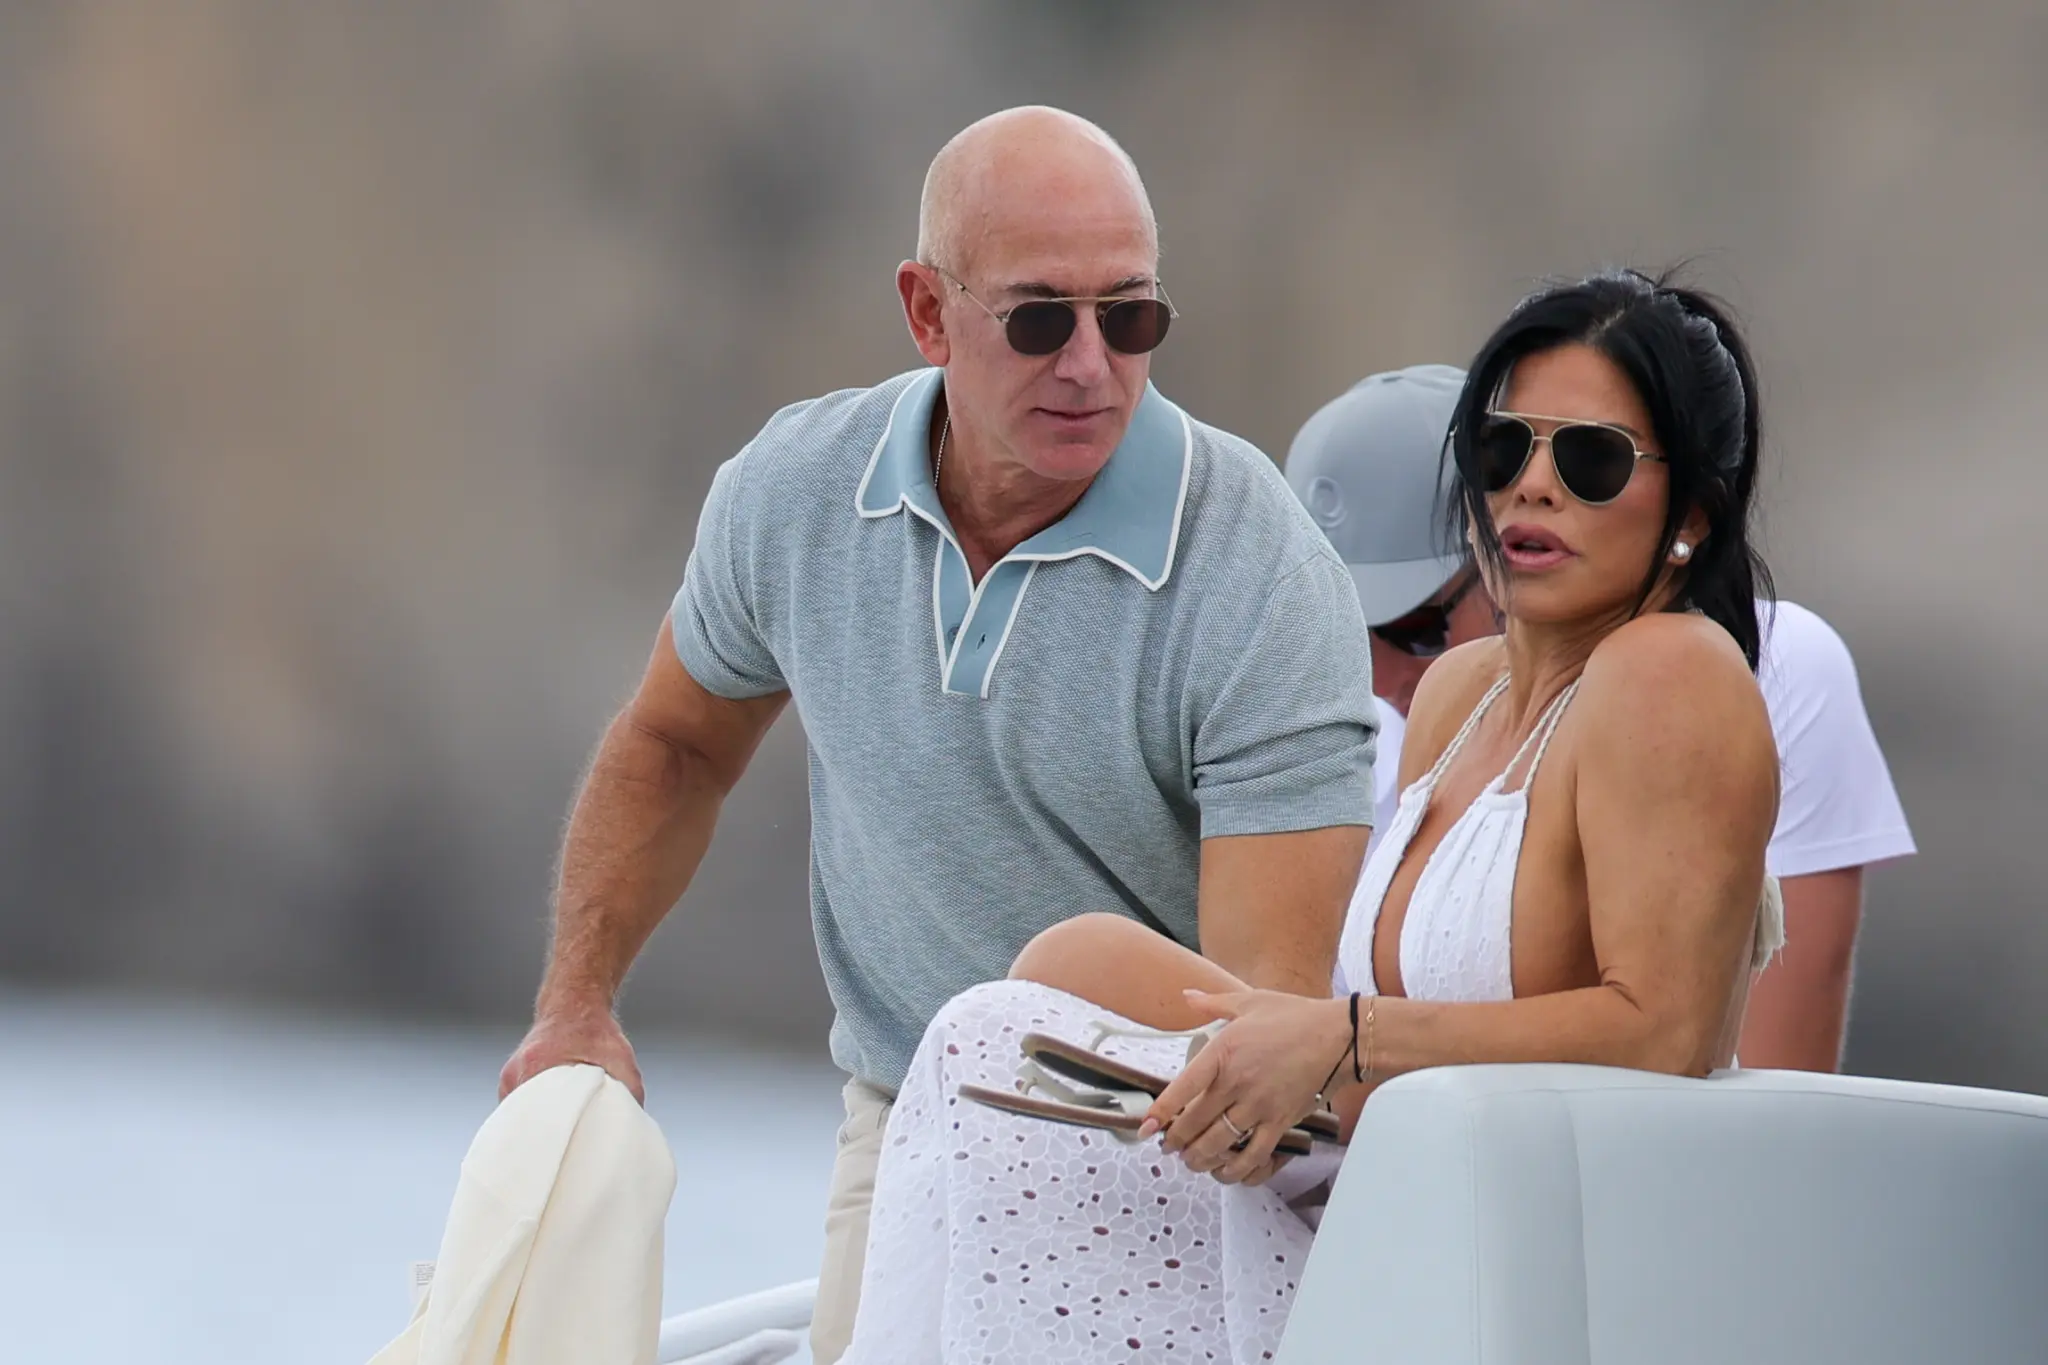 Billionaire Jeff Bezos Engaged to Lauren Sanchez After Nearly 5 years Together